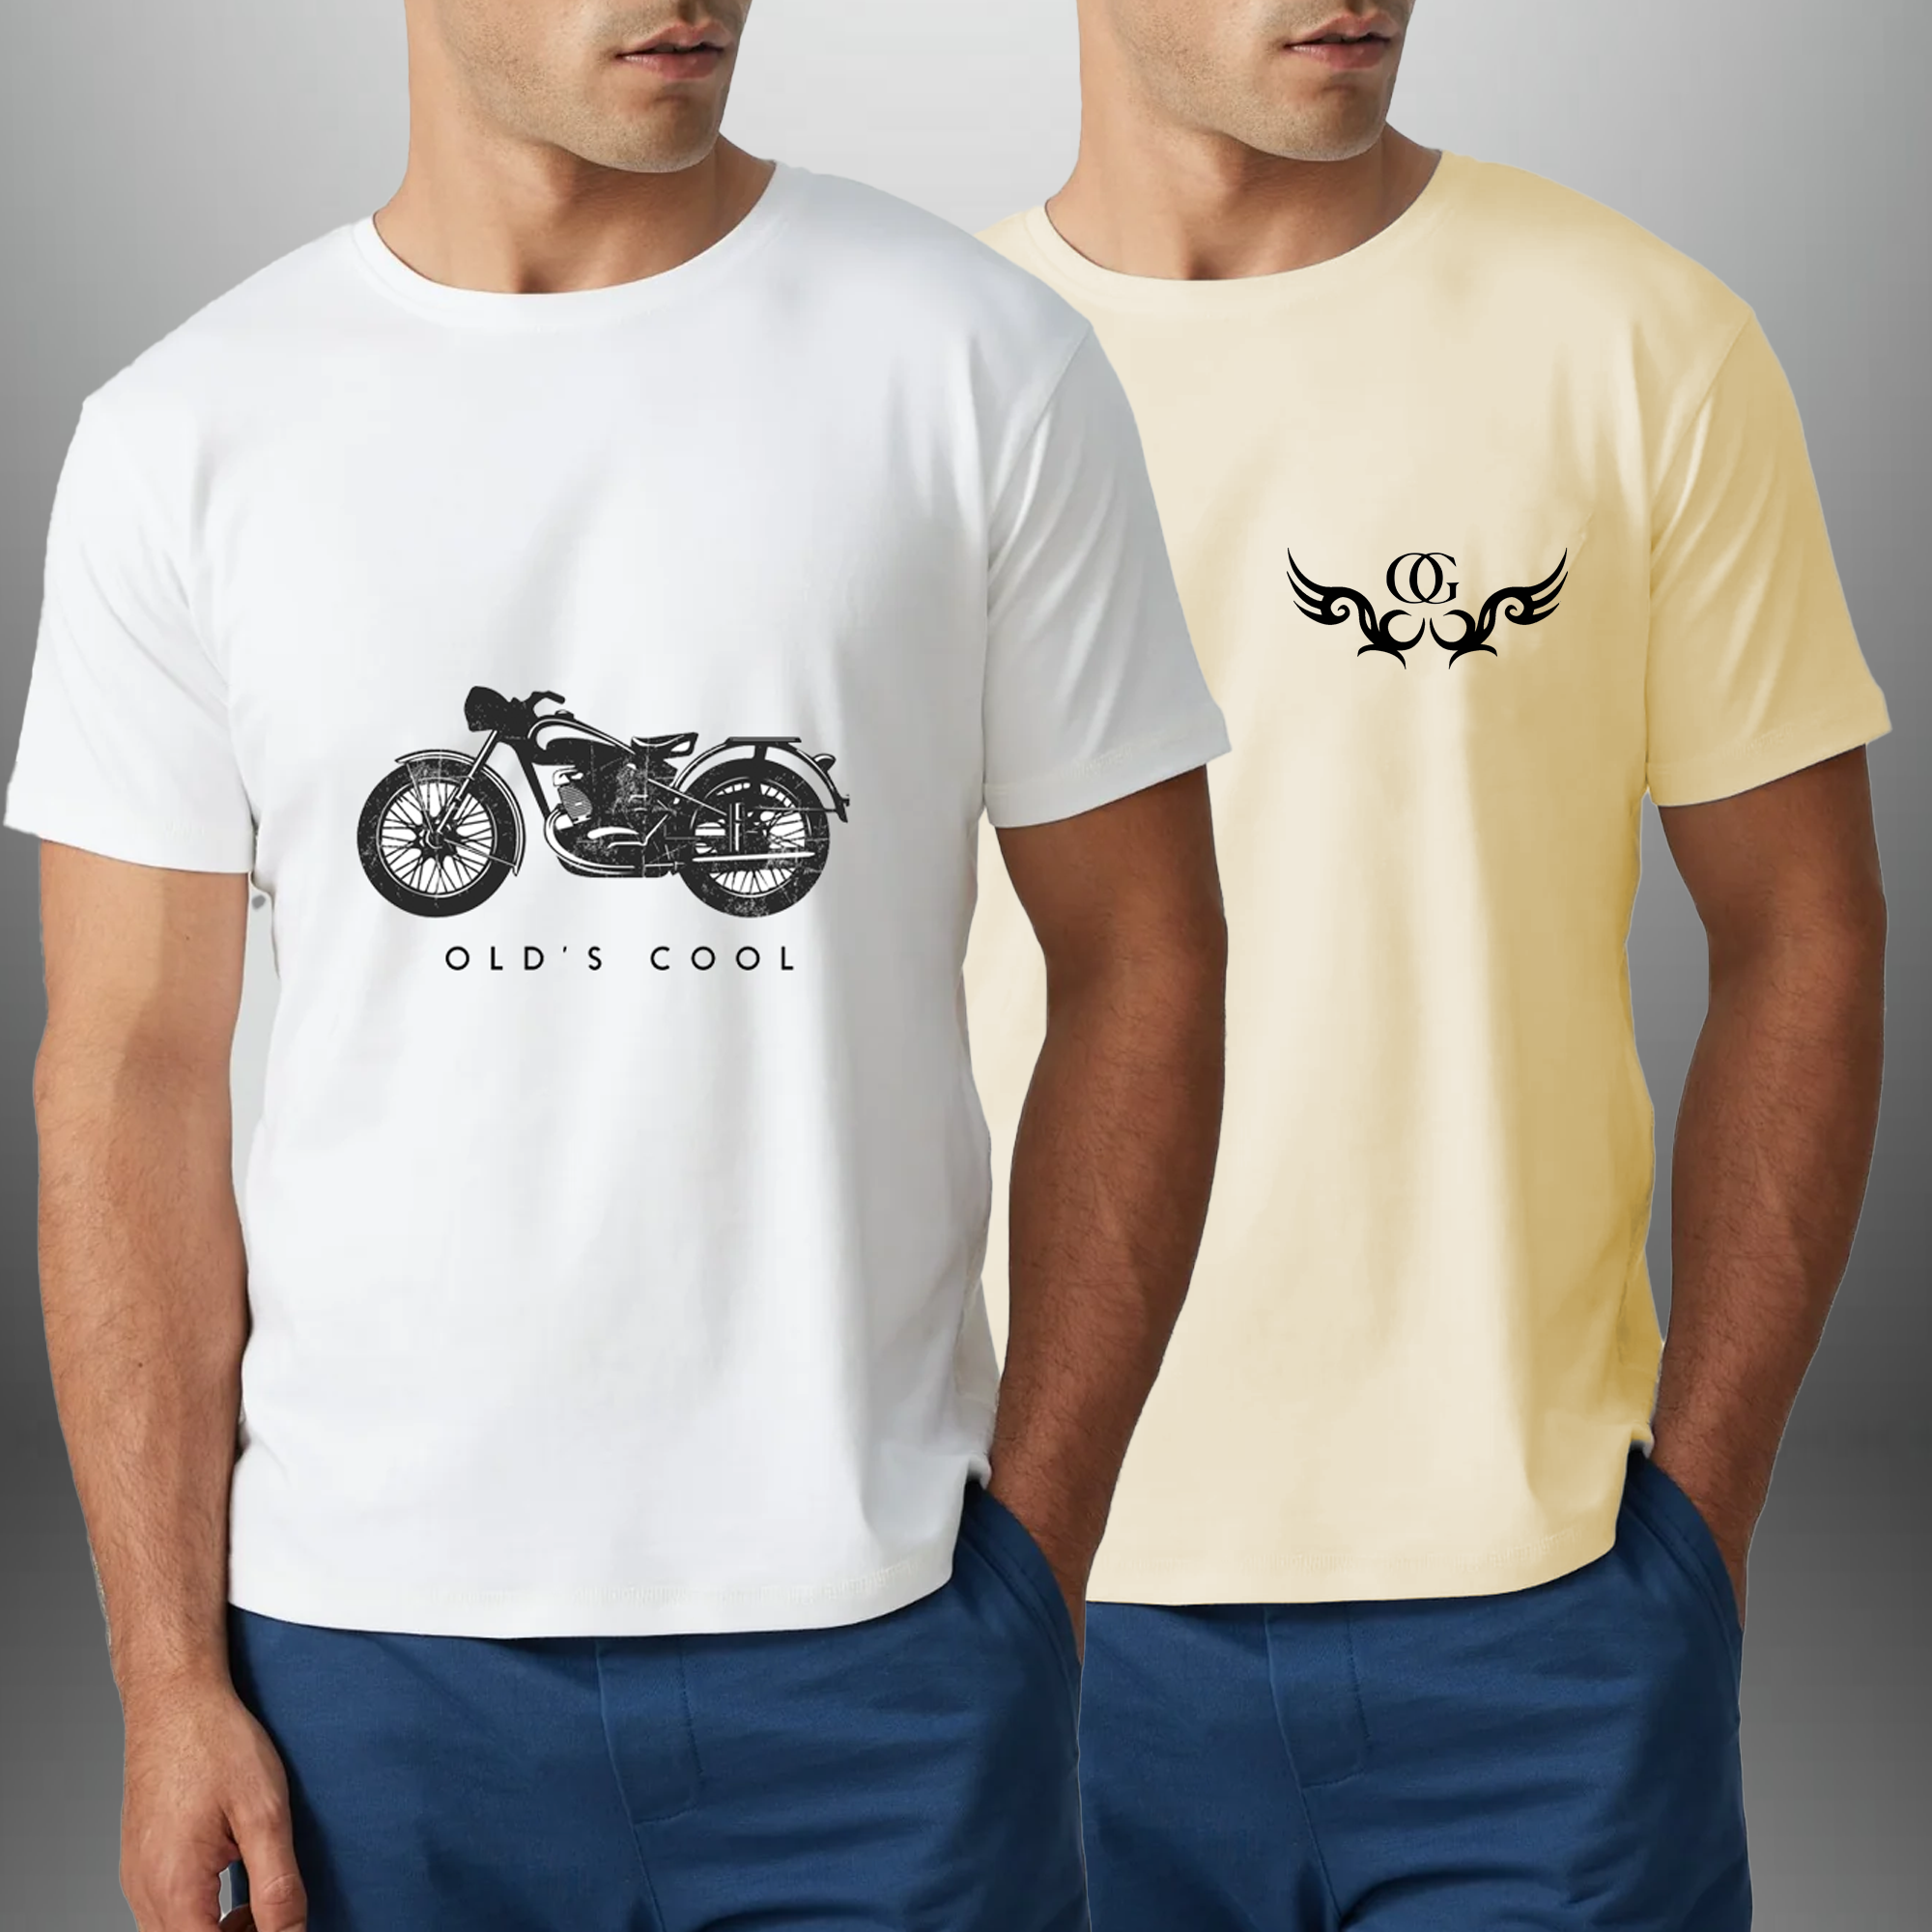 Pack Of 2 Men's  Light Yellow & White Graphic Printed T-Shirts-RKTMCO003